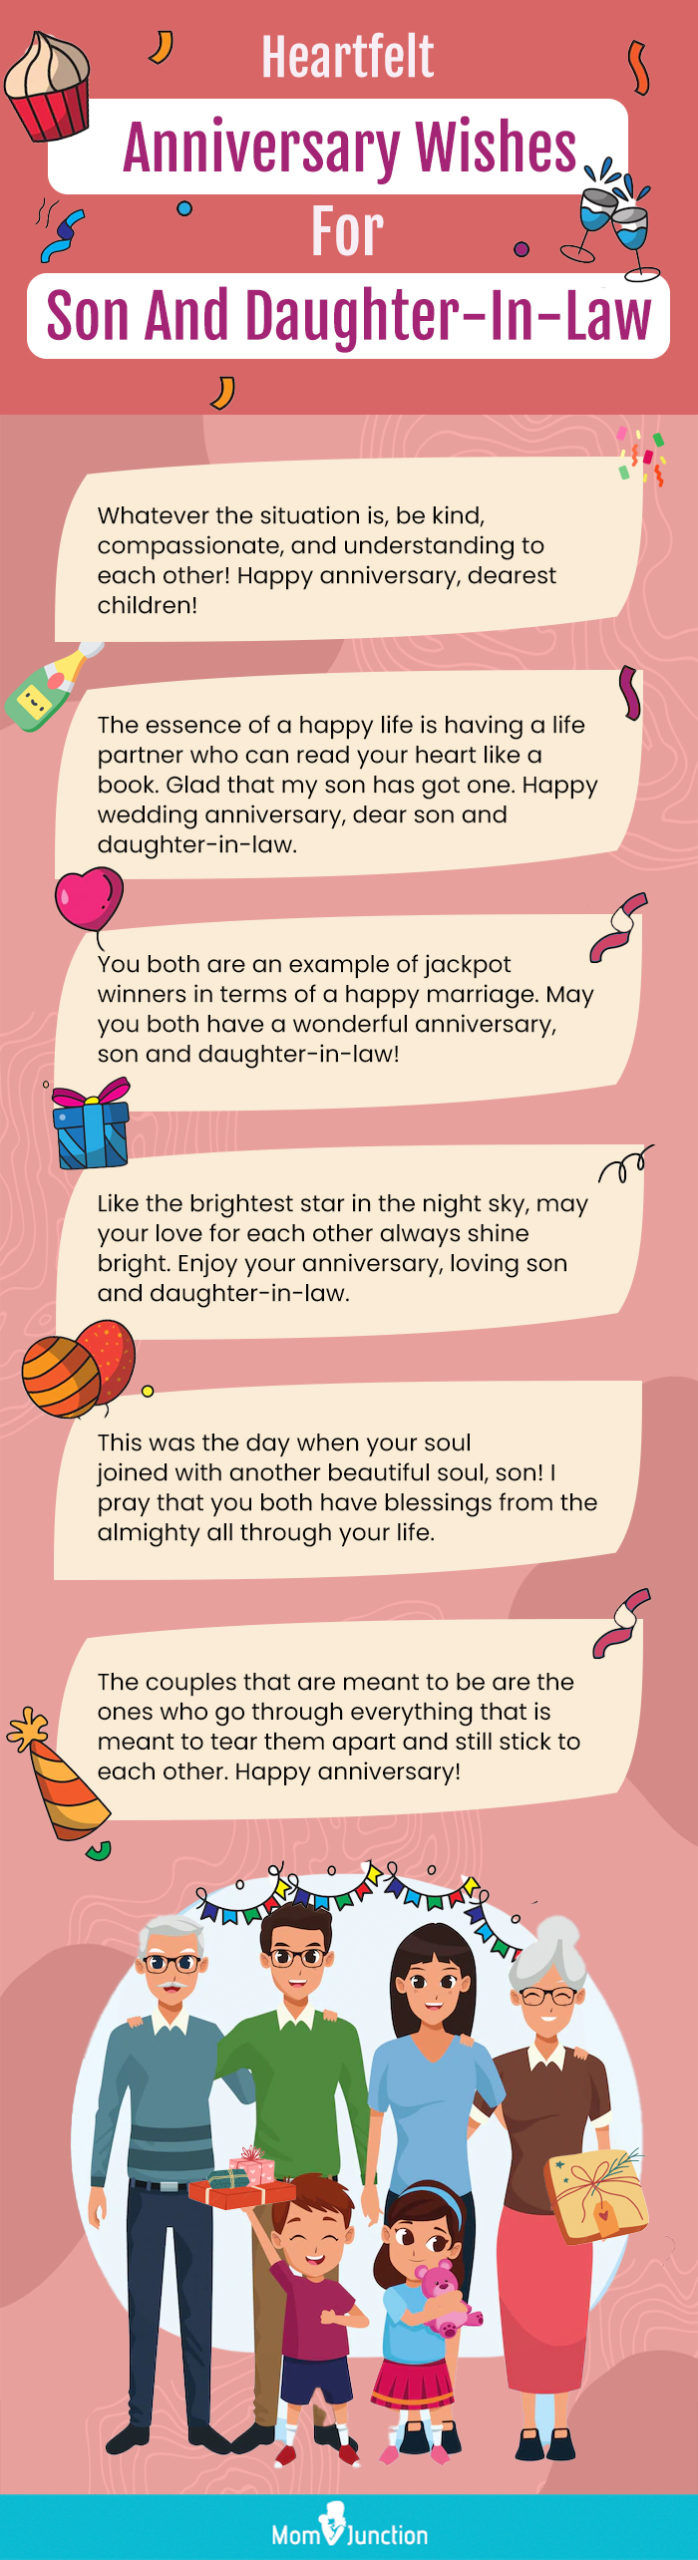 50+ Anniversary Wishes For Son And Daughter-In-Law